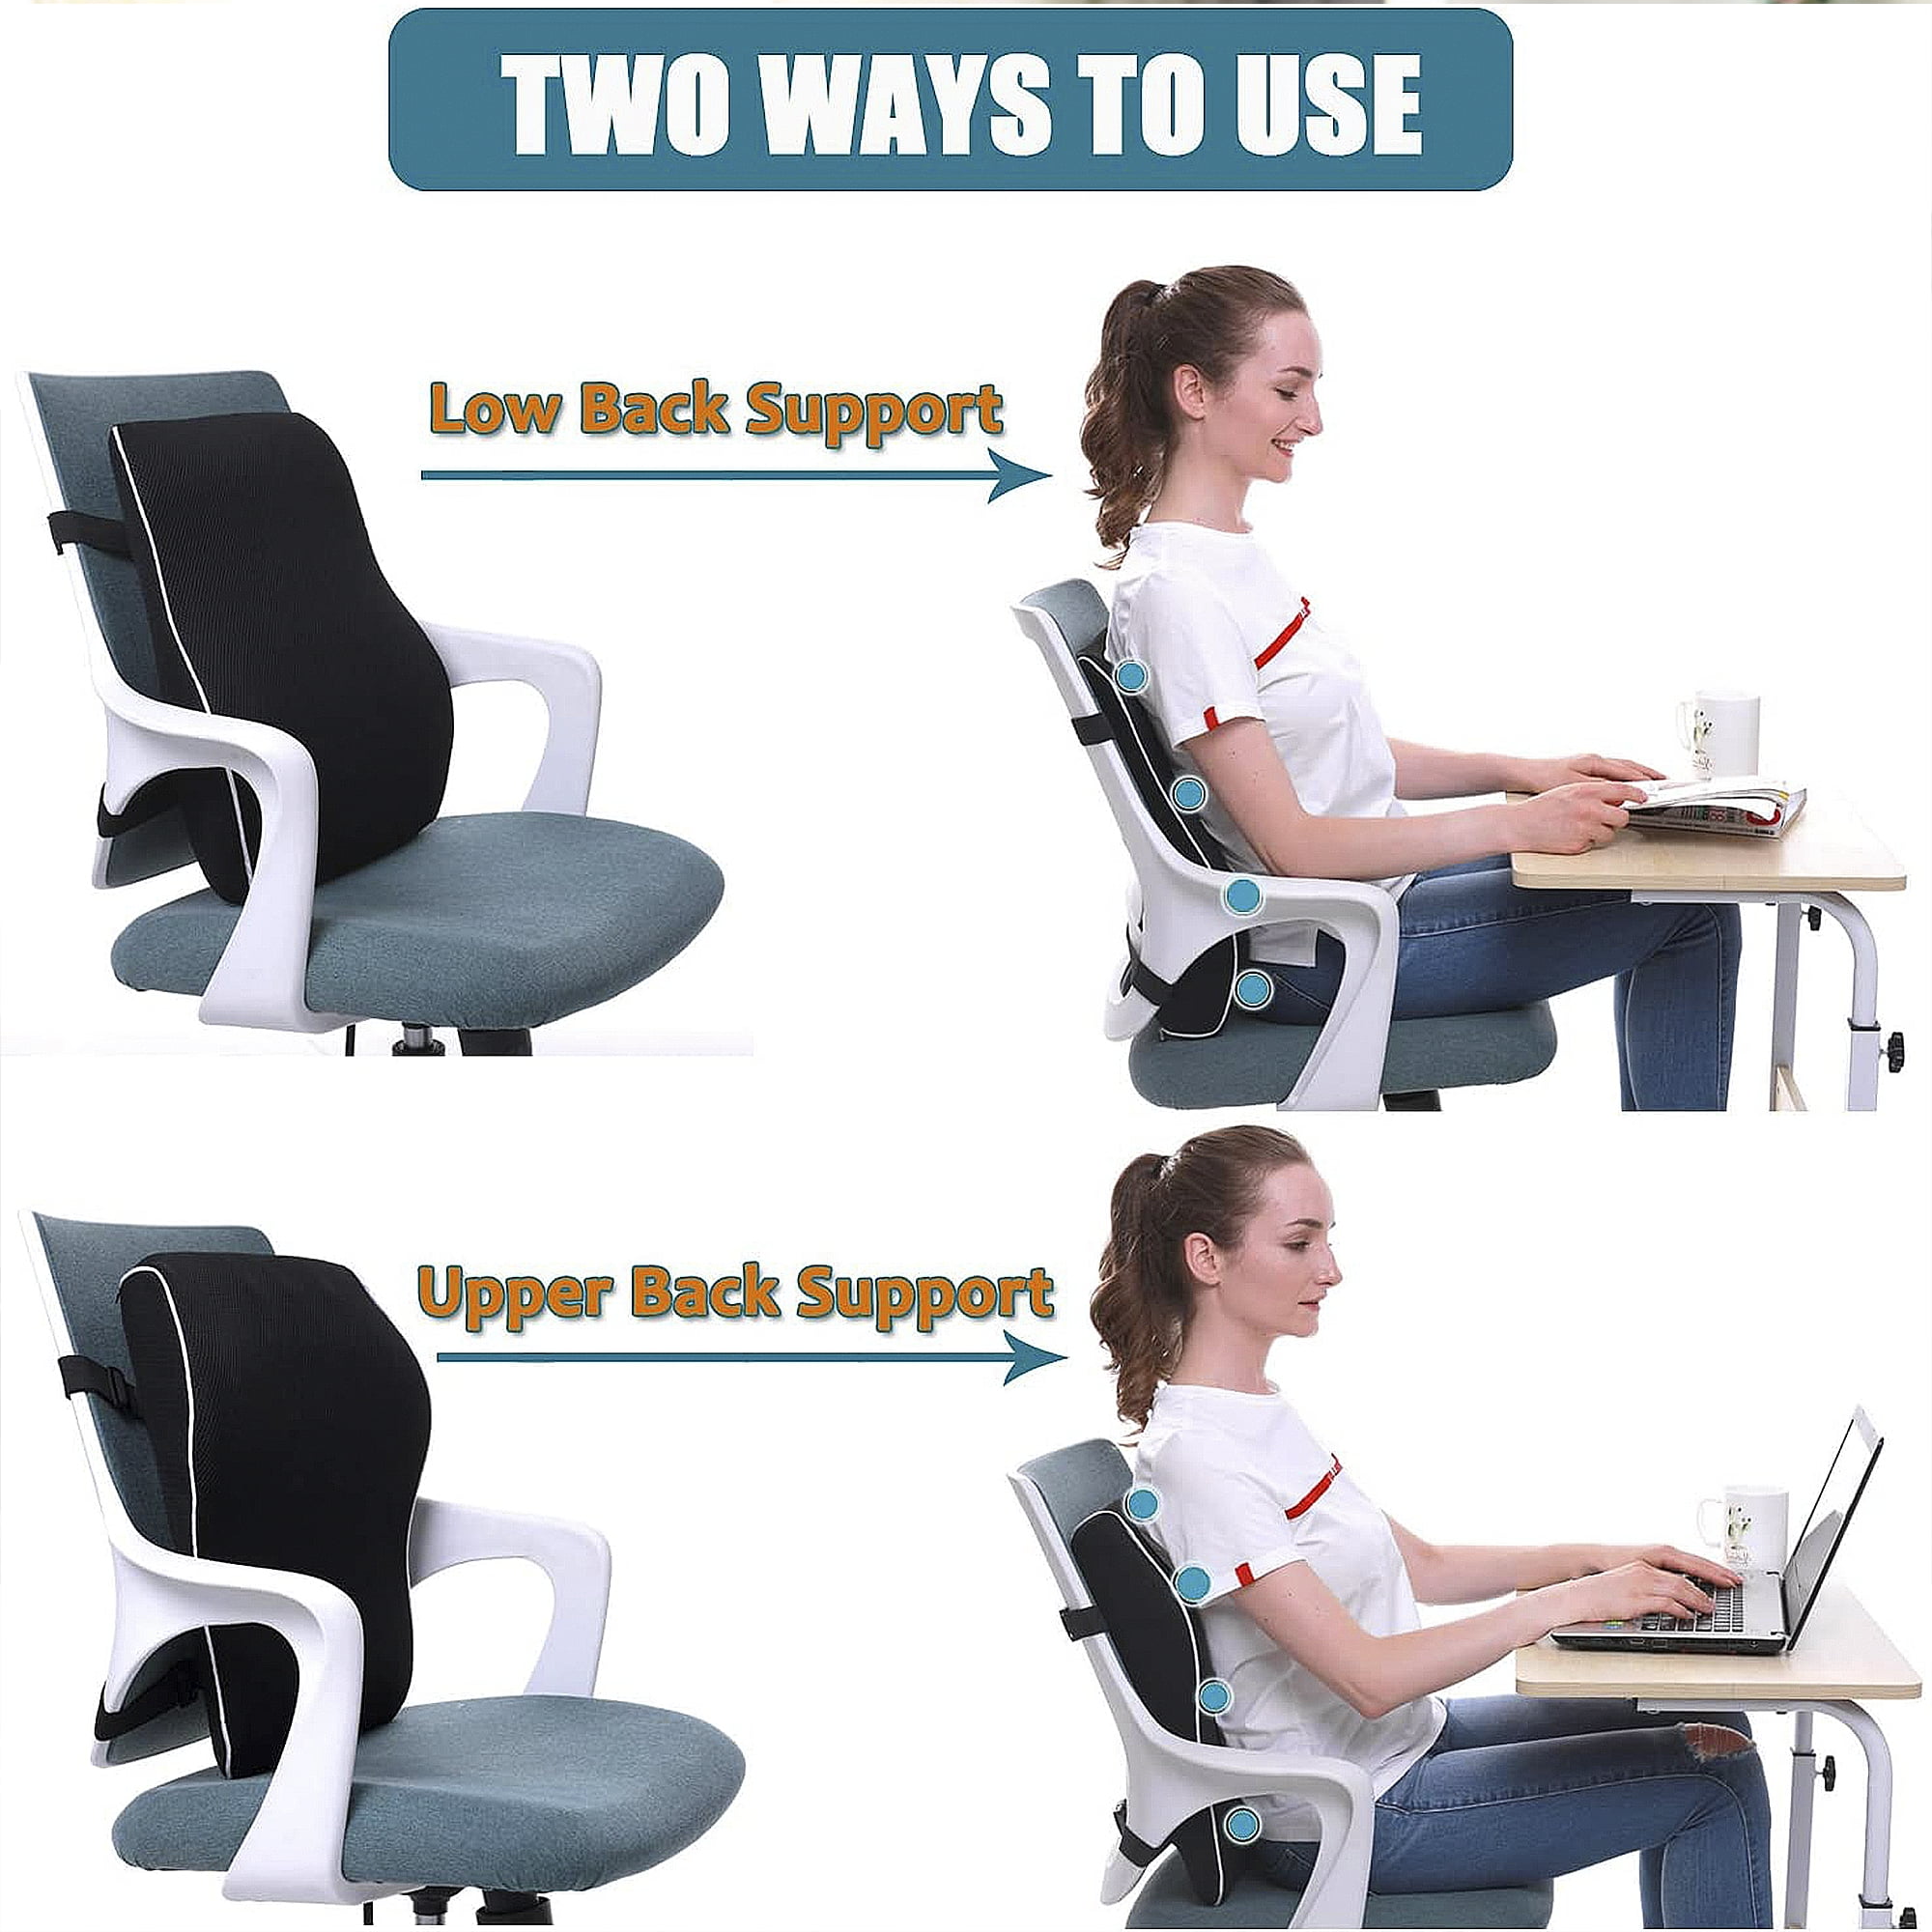 QUTOOL Lumbar Support Pillow for Office Chair Back Support 17x16x5